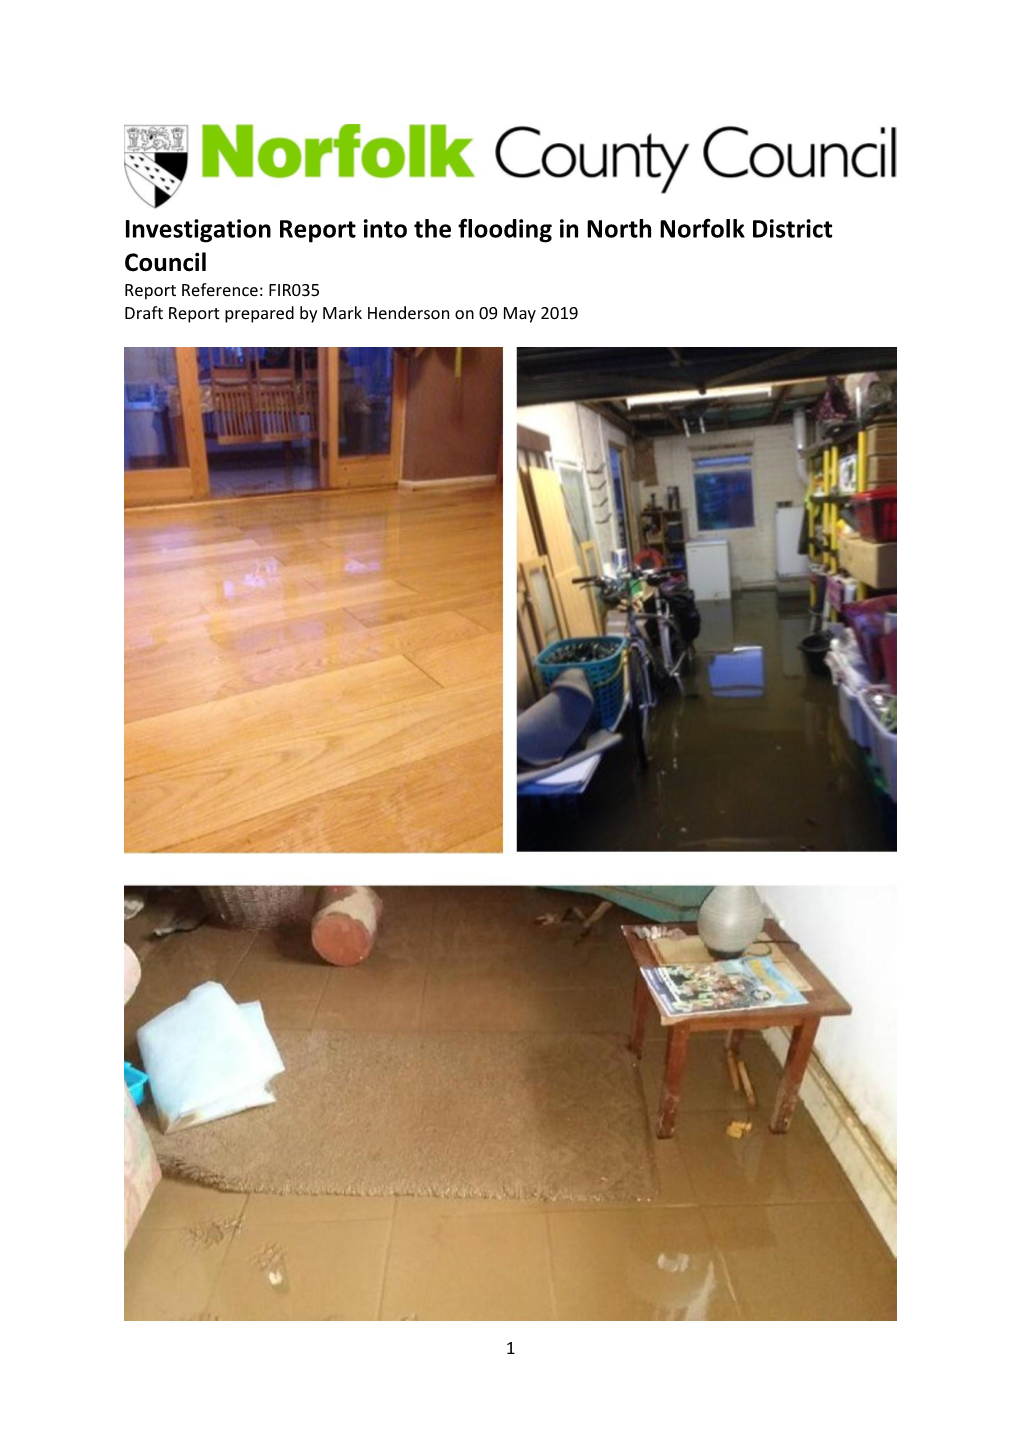 Investigation Report Into the Flooding in North Norfolk District Council Report Reference: FIR035 Draft Report Prepared by Mark Henderson on 09 May 2019